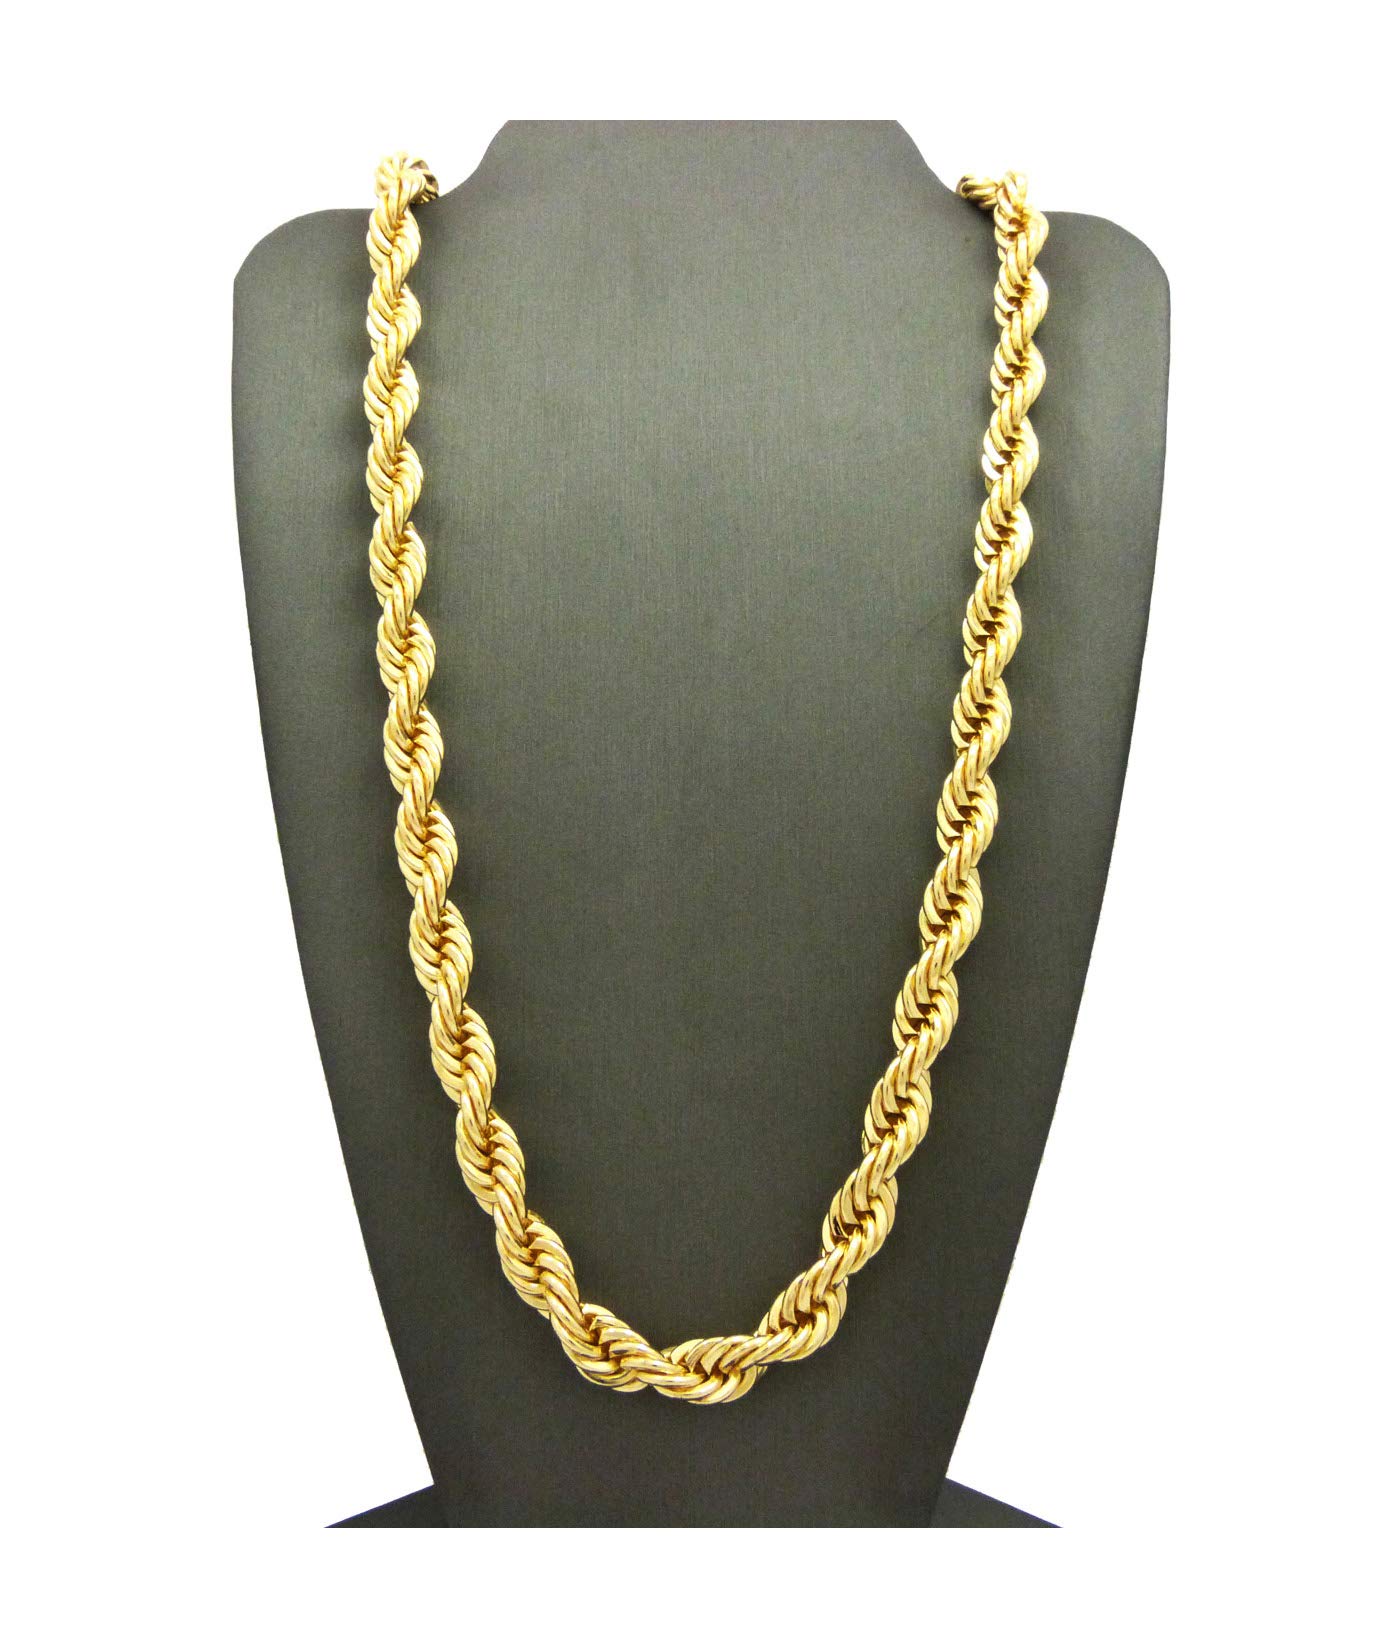 Fashion 21 Hip Hop 80' Unisex Rapper's 8, 10, 12mm Hollow Rope Chain Necklace in Gold, Silver Tone